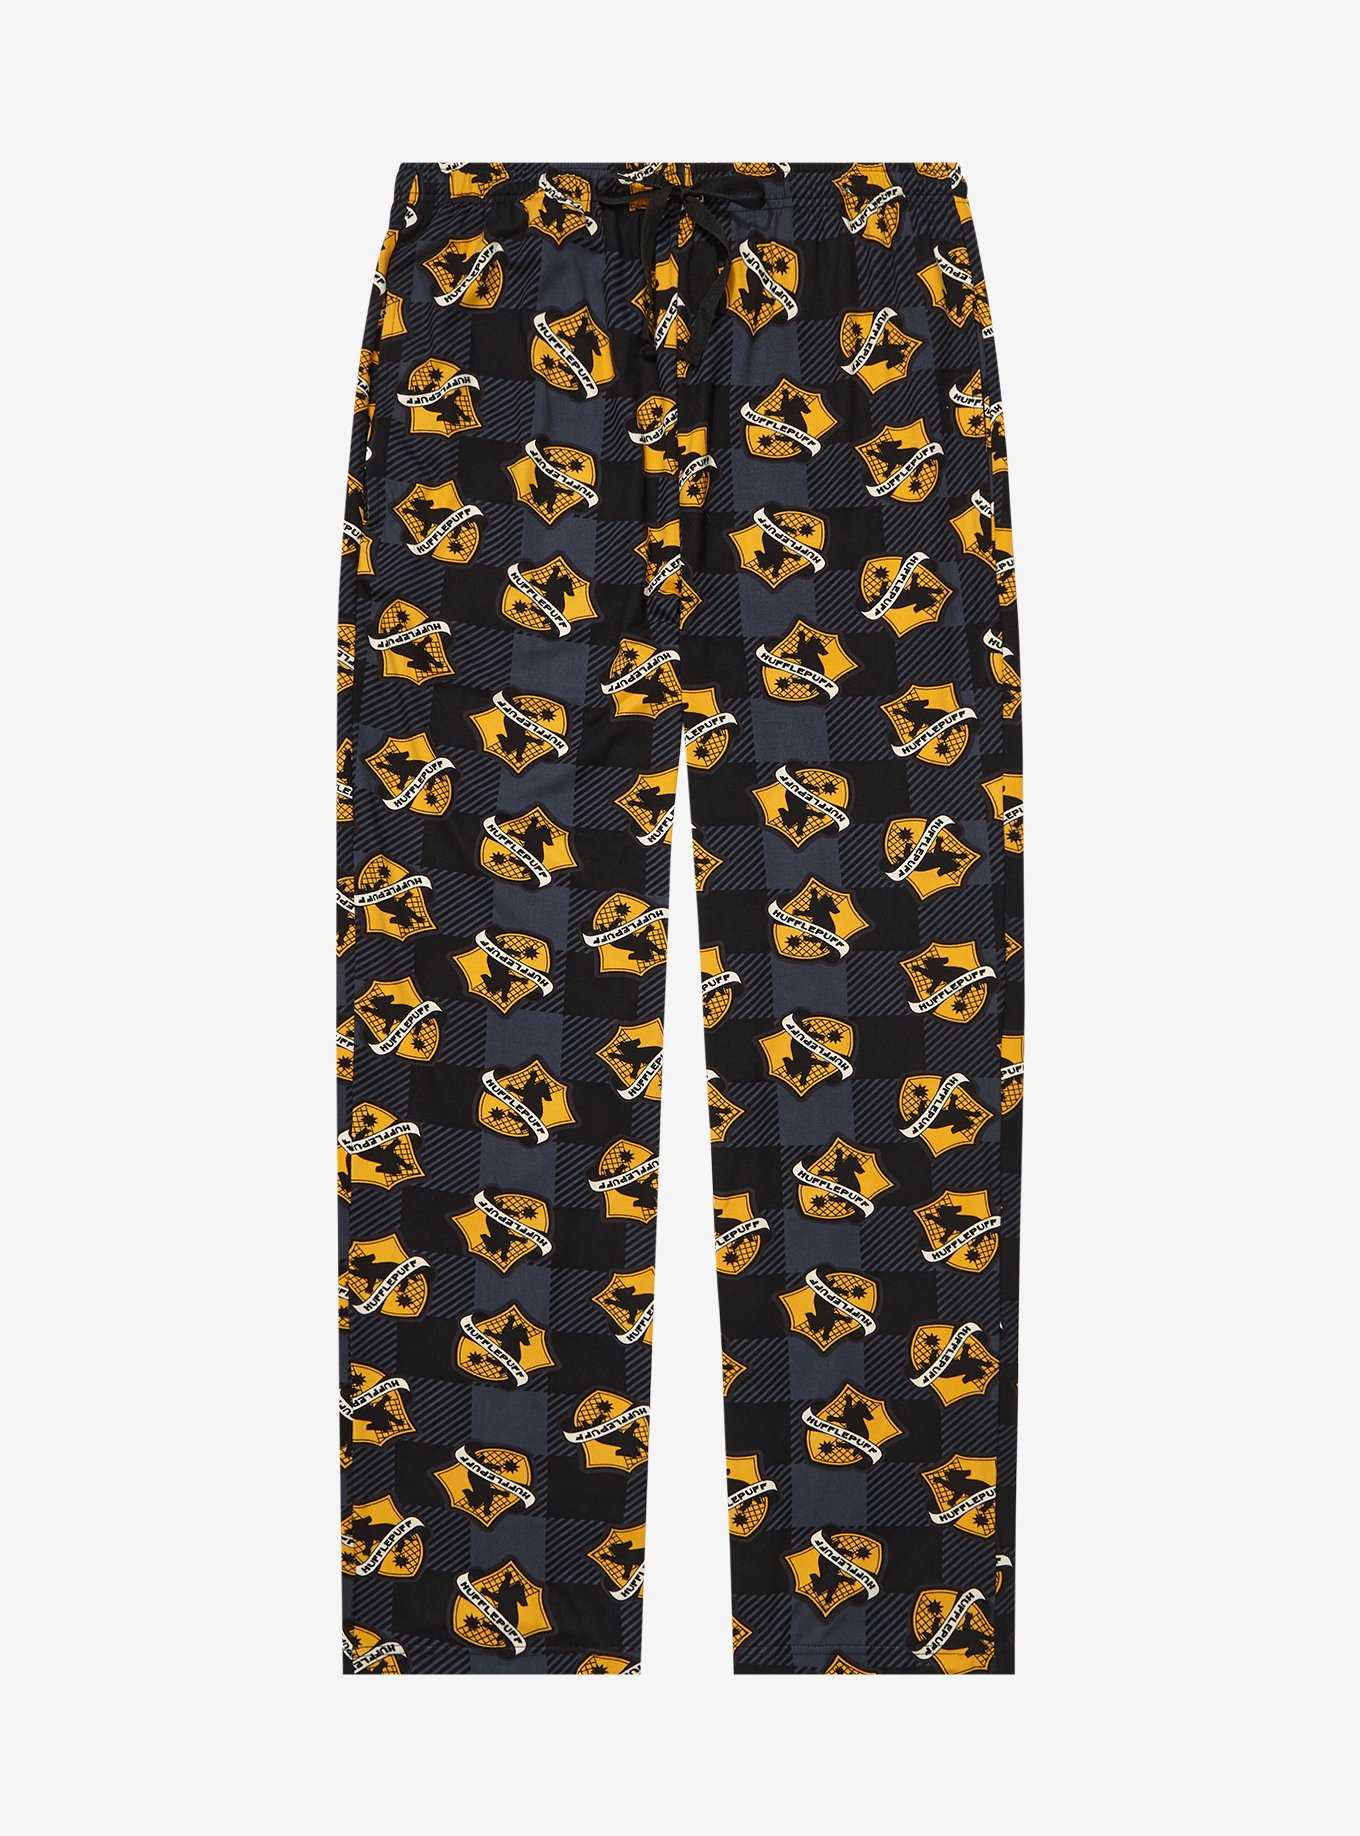 Harry Potter Plaid Hufflepuff Allover Print Sleep Pants - BoxLunch Exclusive, , hi-res